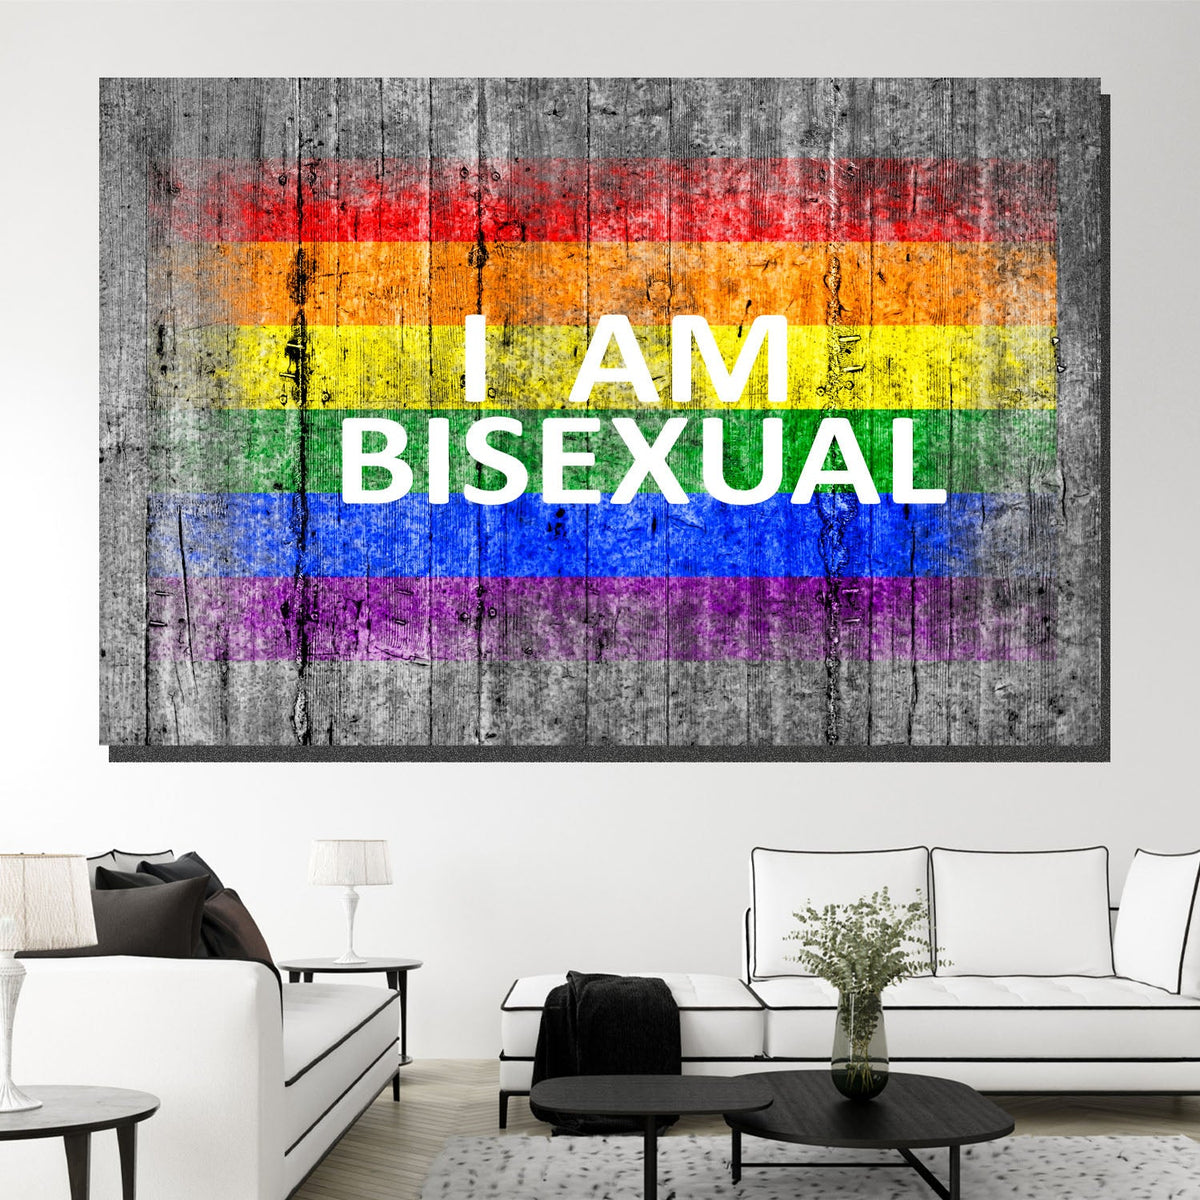 https://cdn.shopify.com/s/files/1/0387/9986/8044/products/IamBisexualCanvasArtprintStretched-1.jpg